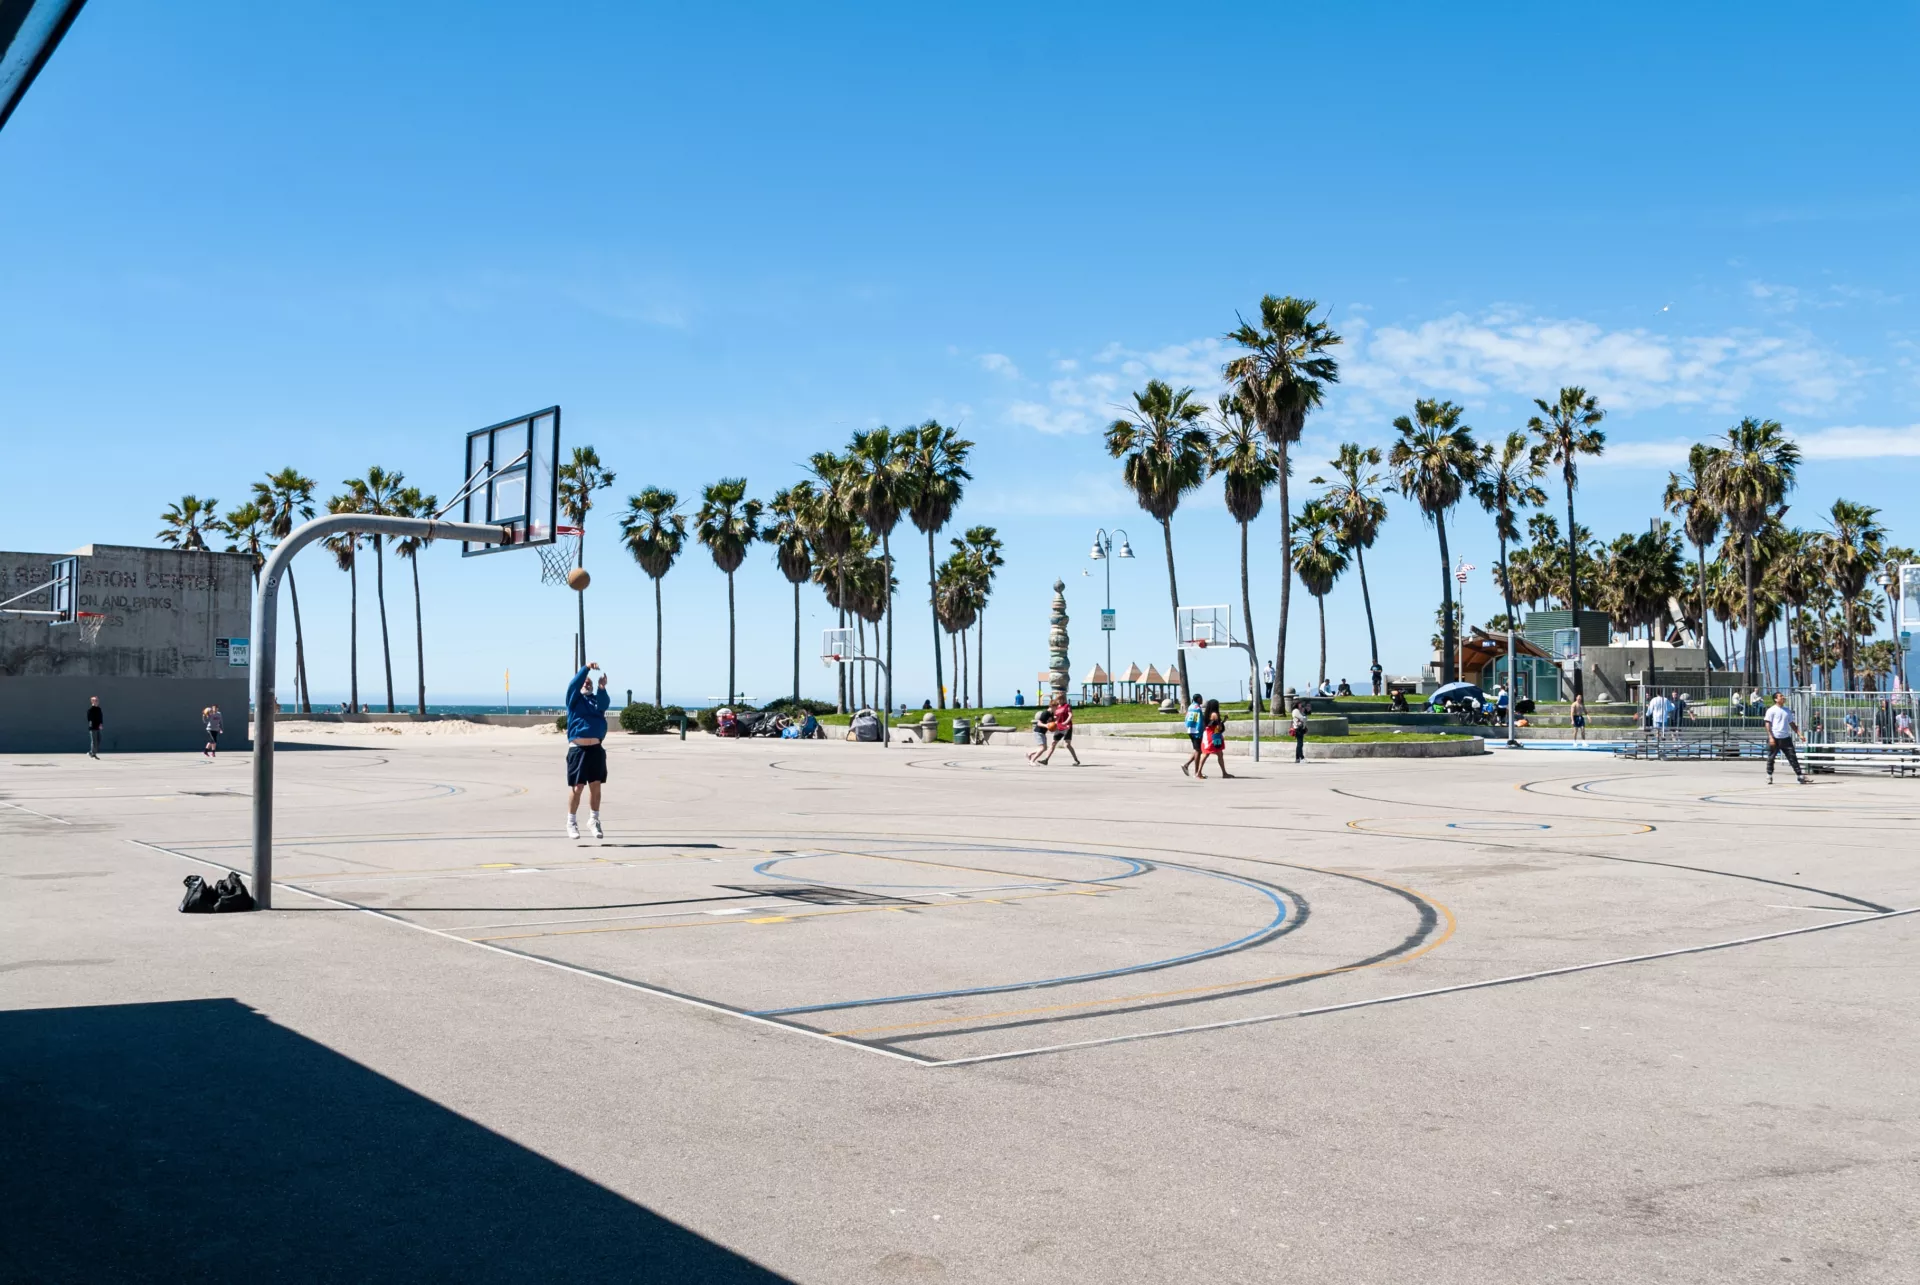 David Vives: Basketball court surrounded by Pam trees for Neighborhood Improvement